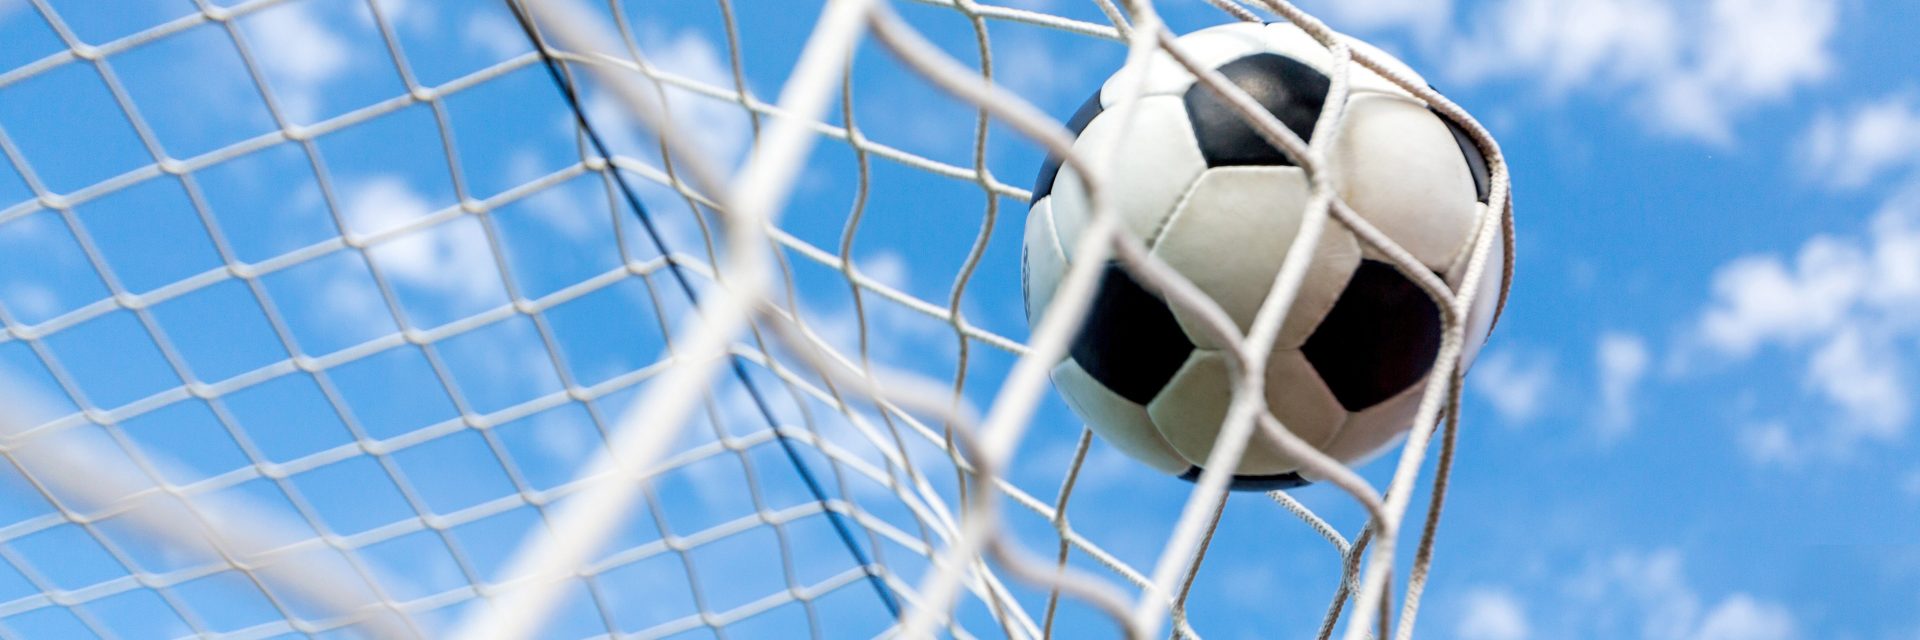 Premier League promotes football analytics with Oracle Cloud